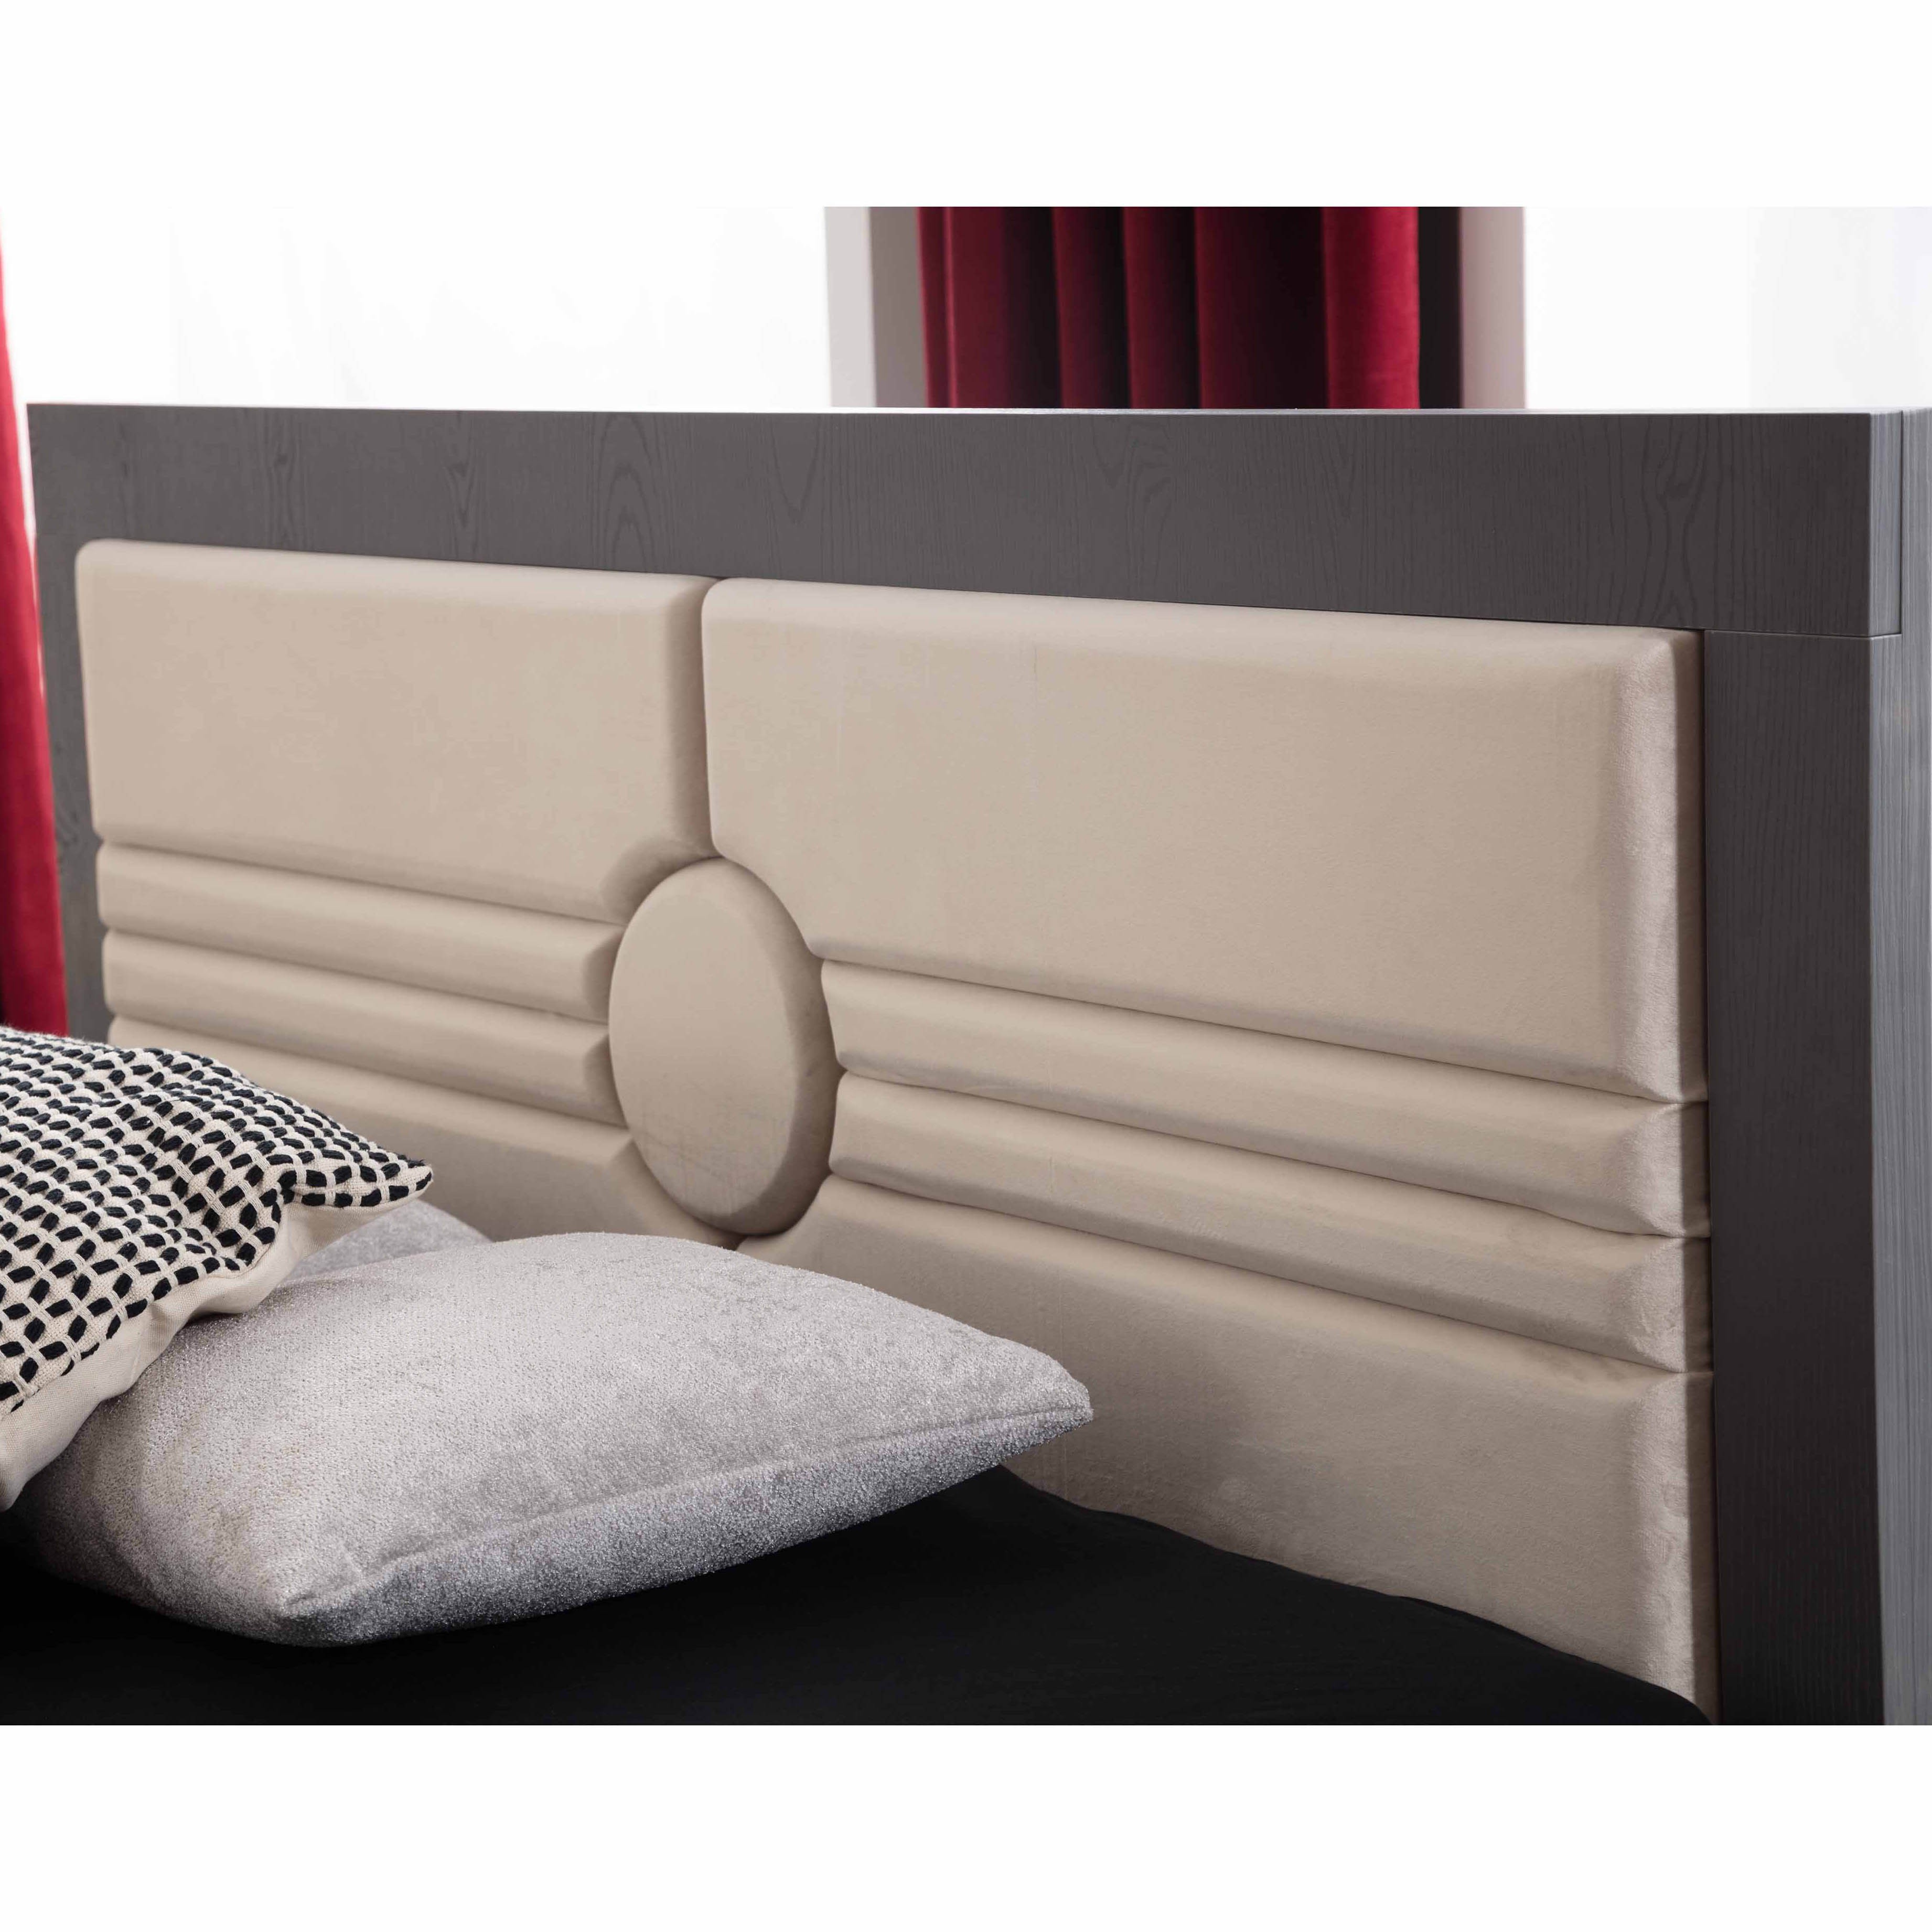 Petra Bed With Storage 180x200 cm